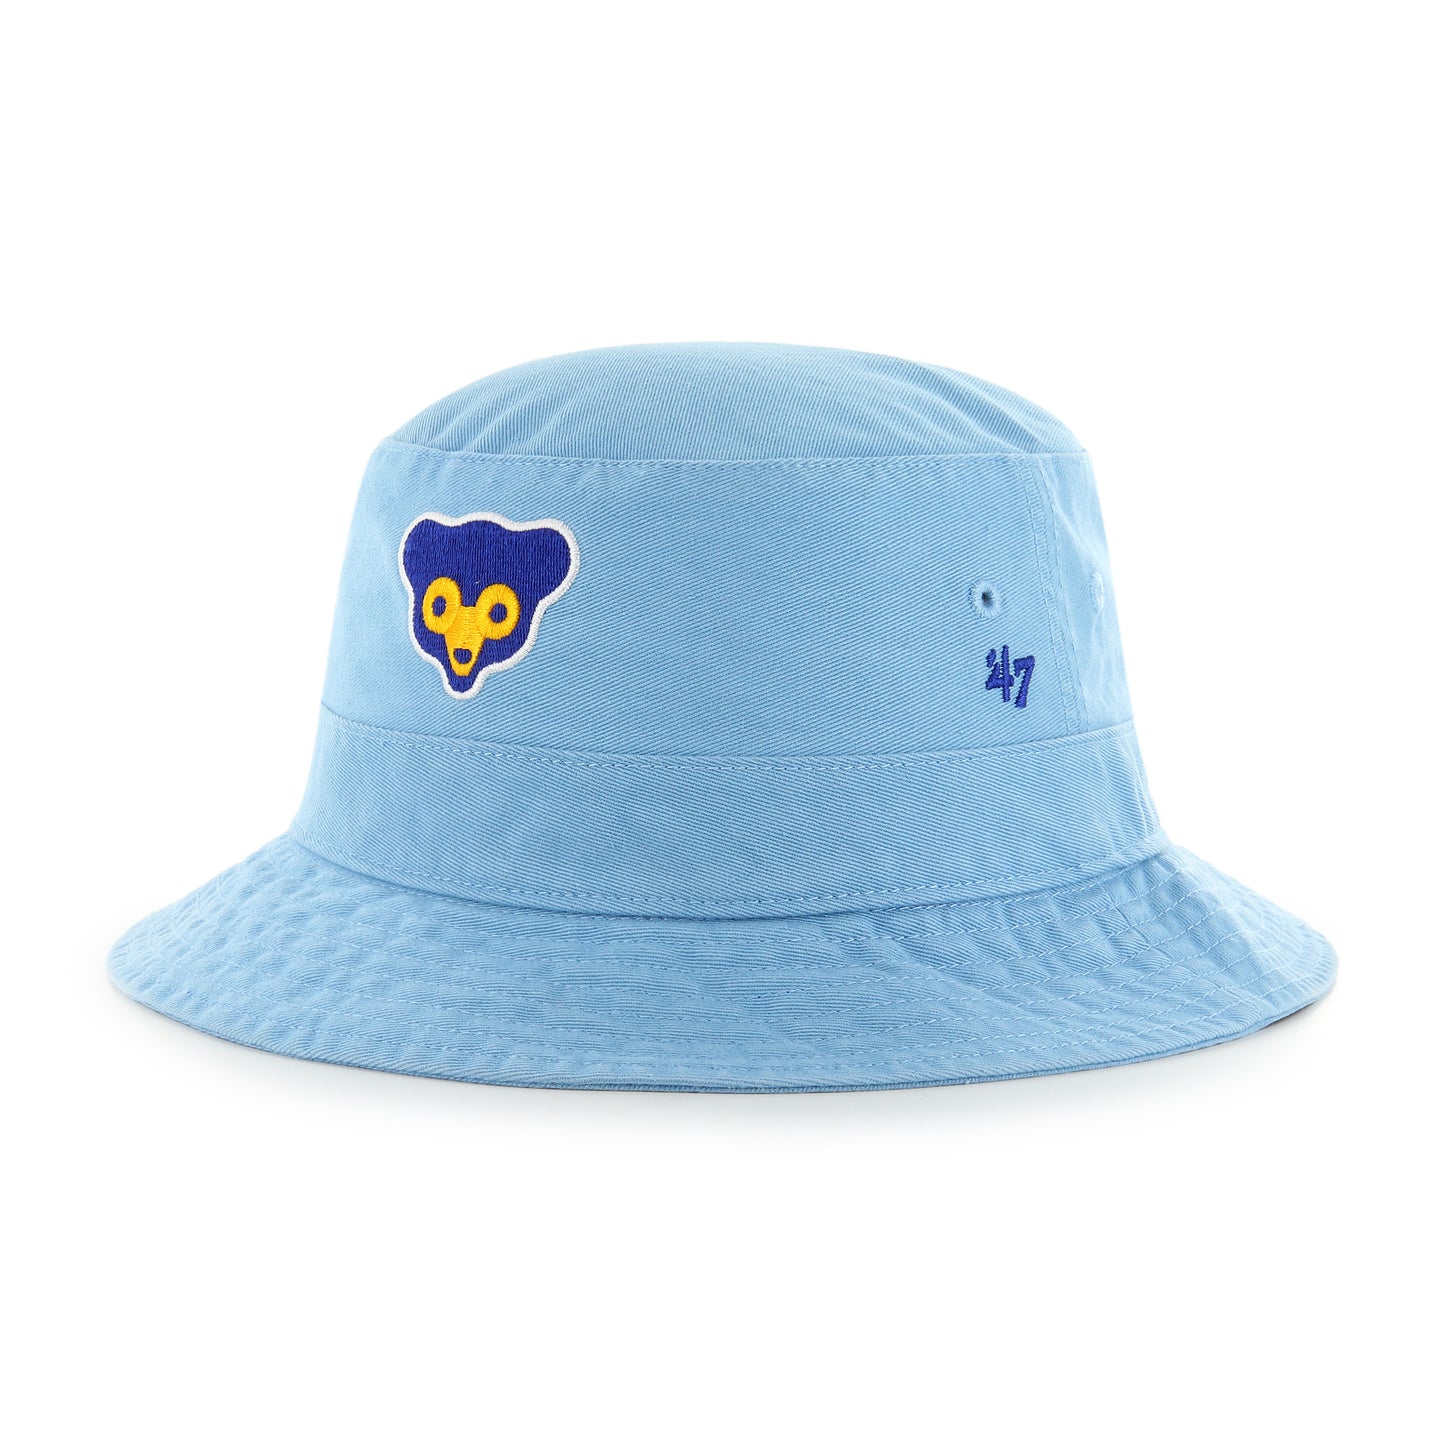 Chicago Cubs Columbia Blue '47 Bucket Hat